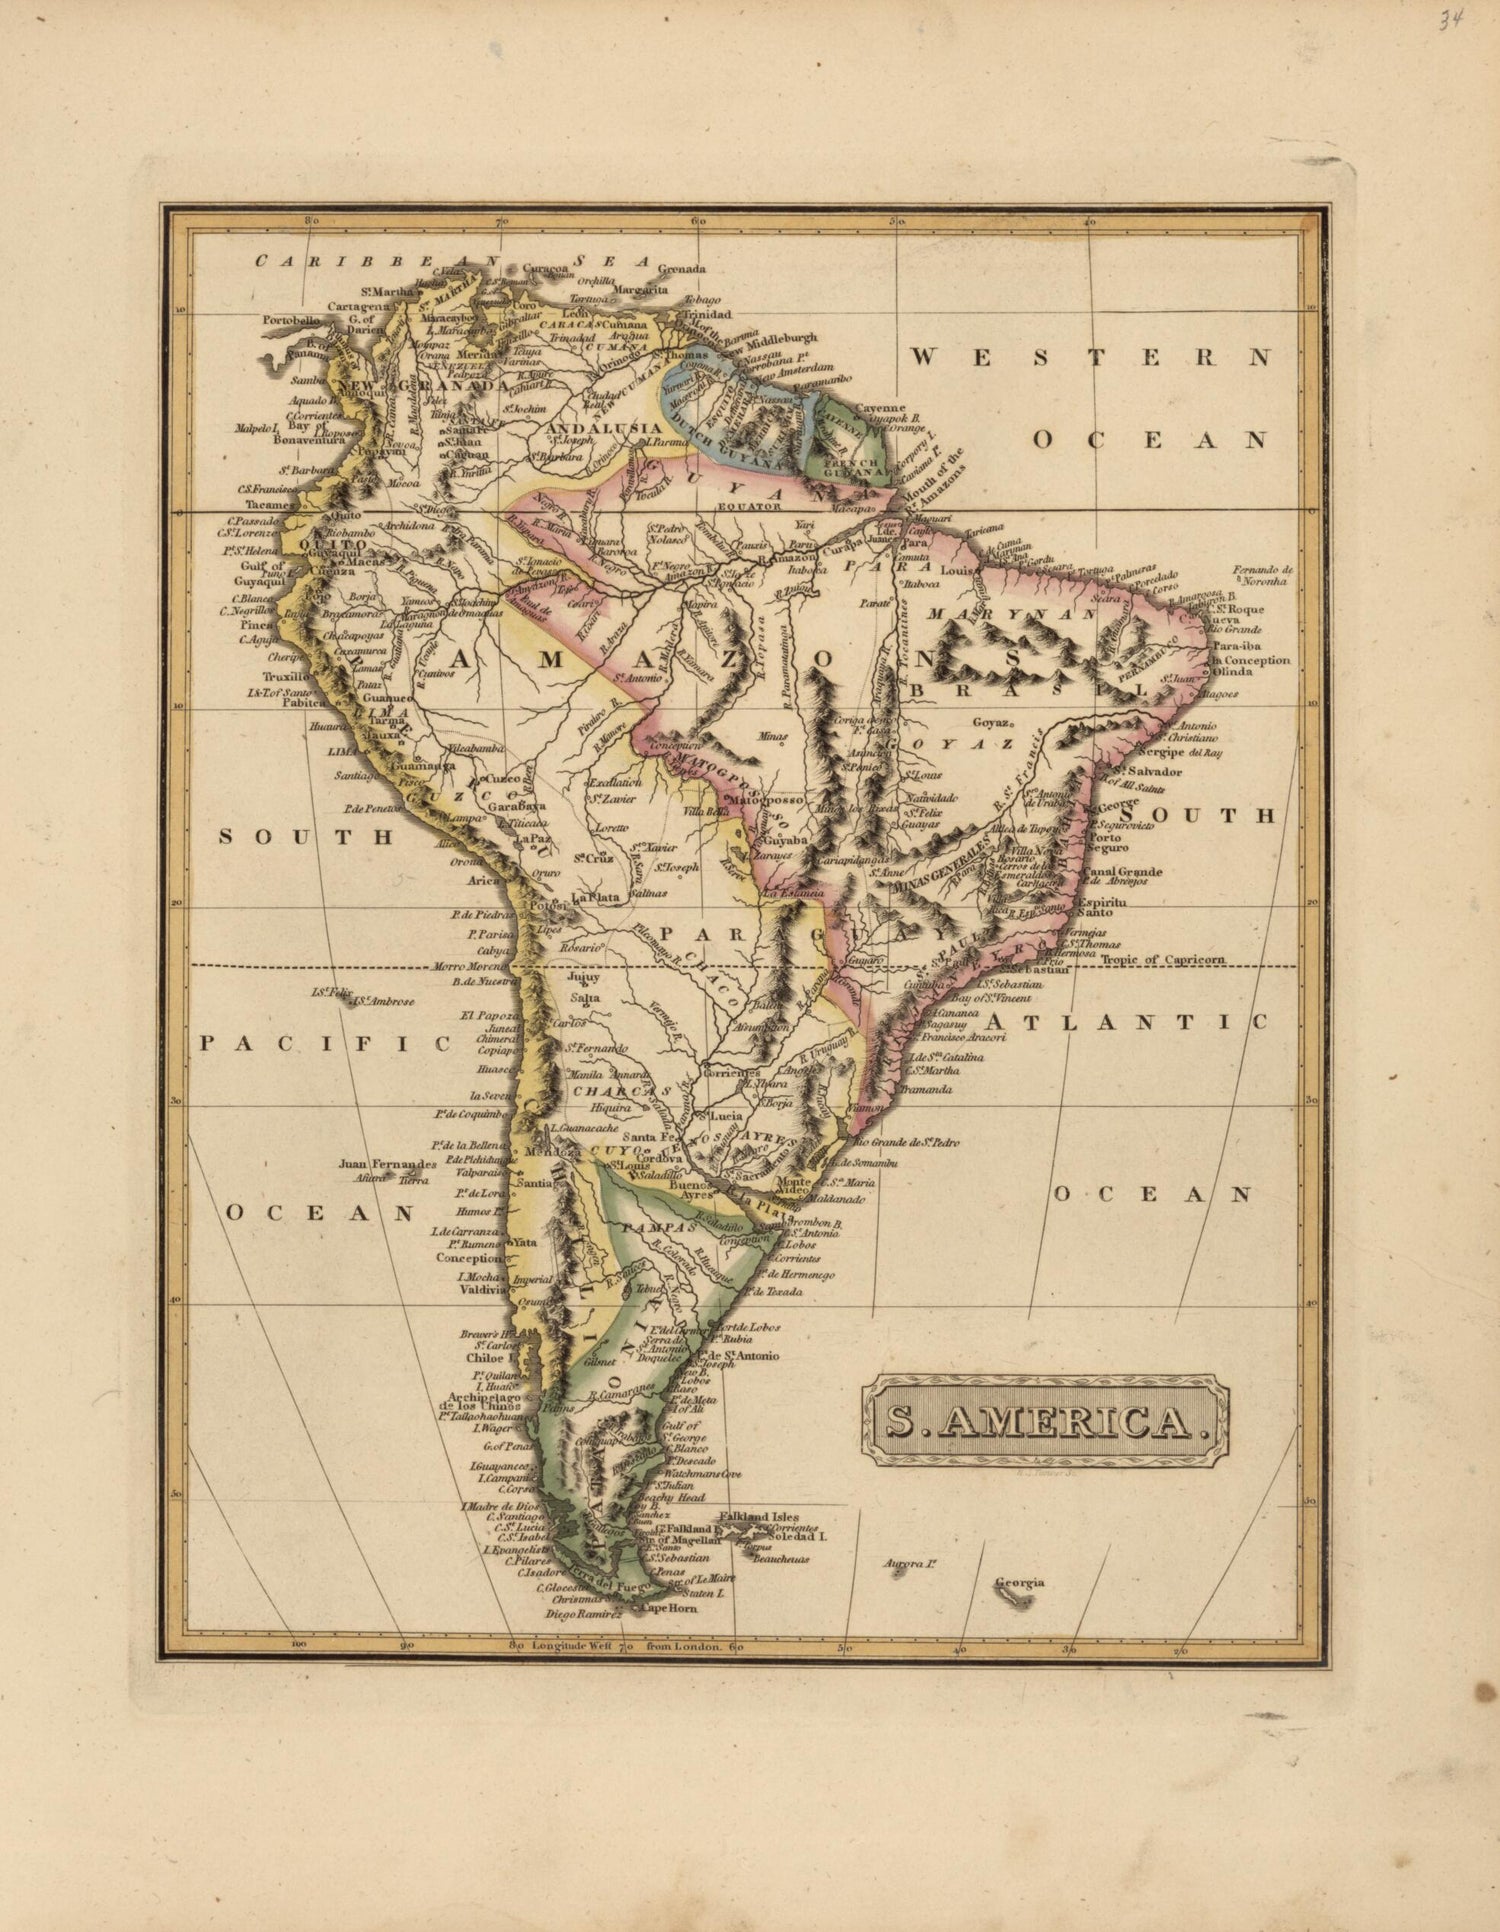 This old map of South America from a New and Elegant General Atlas, Containing Maps of Each of the United States. from 1817 was created by Henry Schenck Tanner in 1817